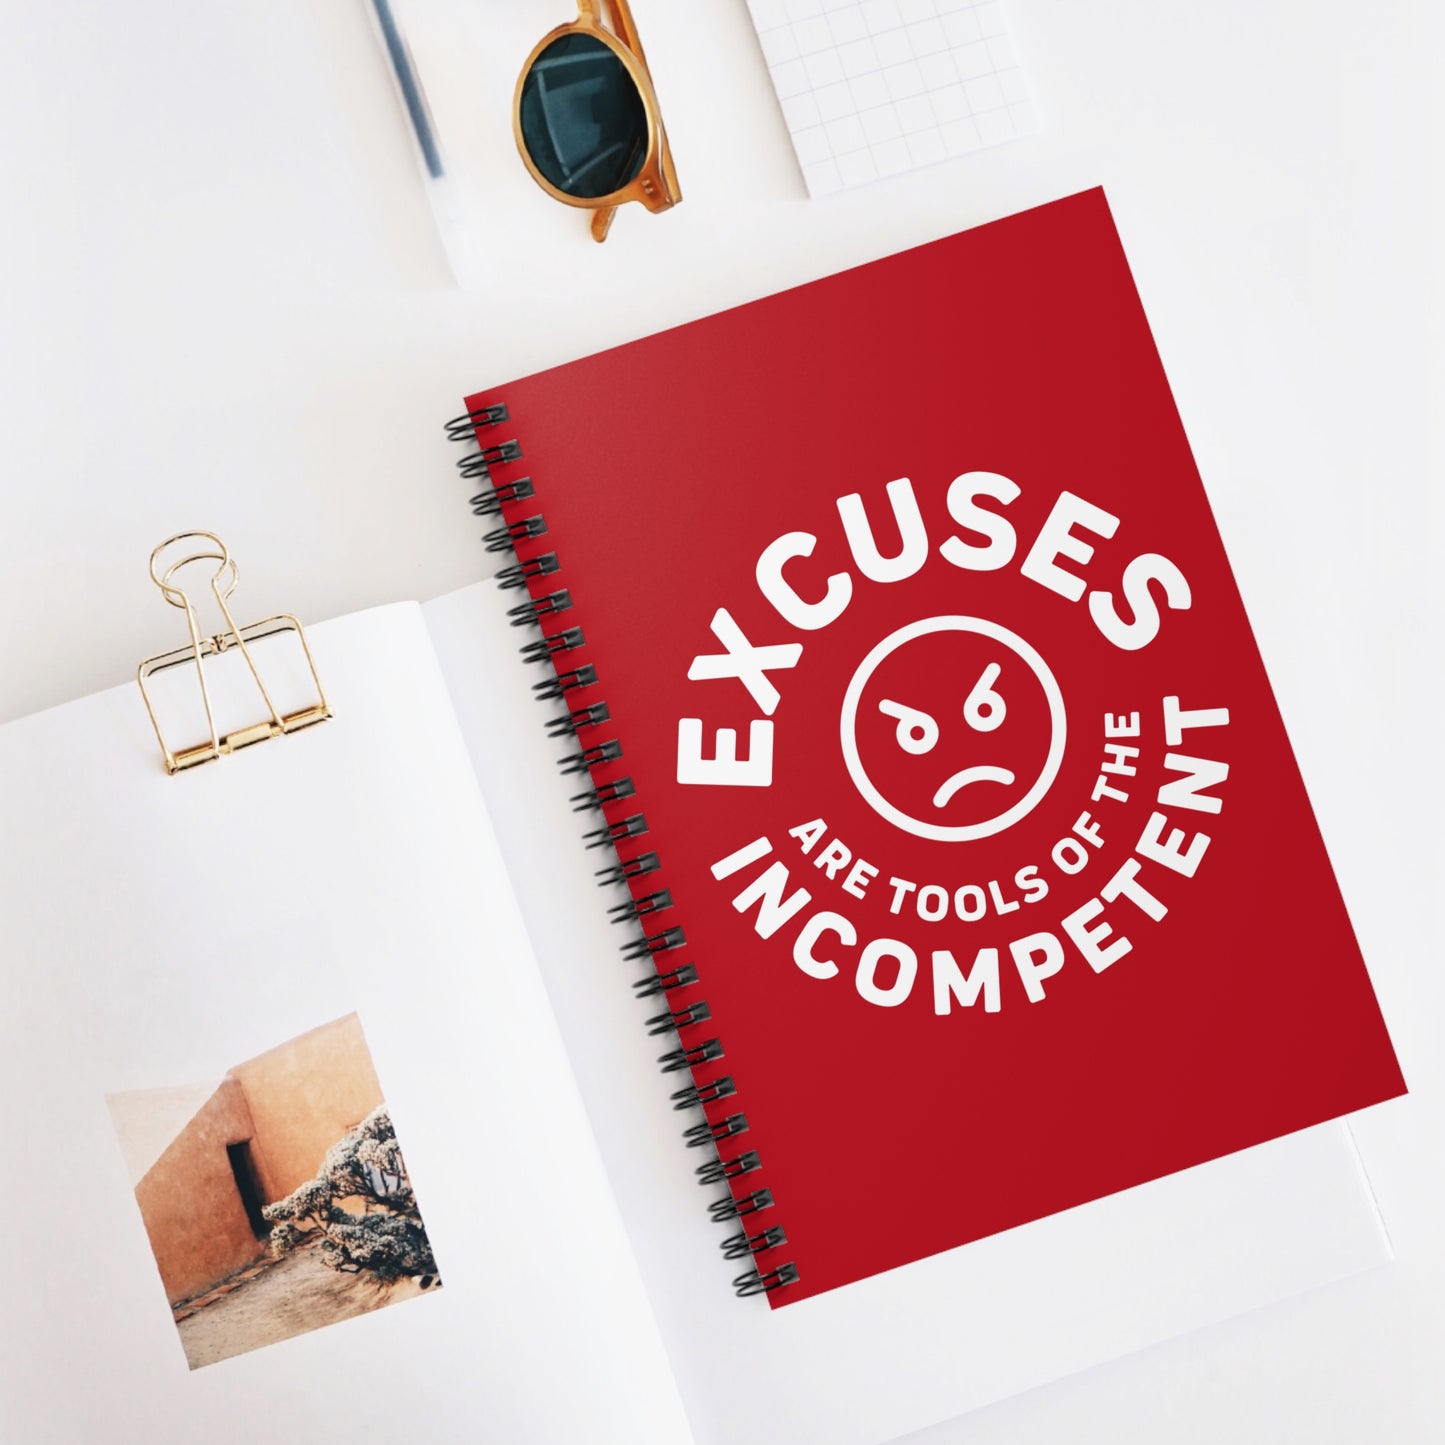 Excuses Mini Notebook - White on Red